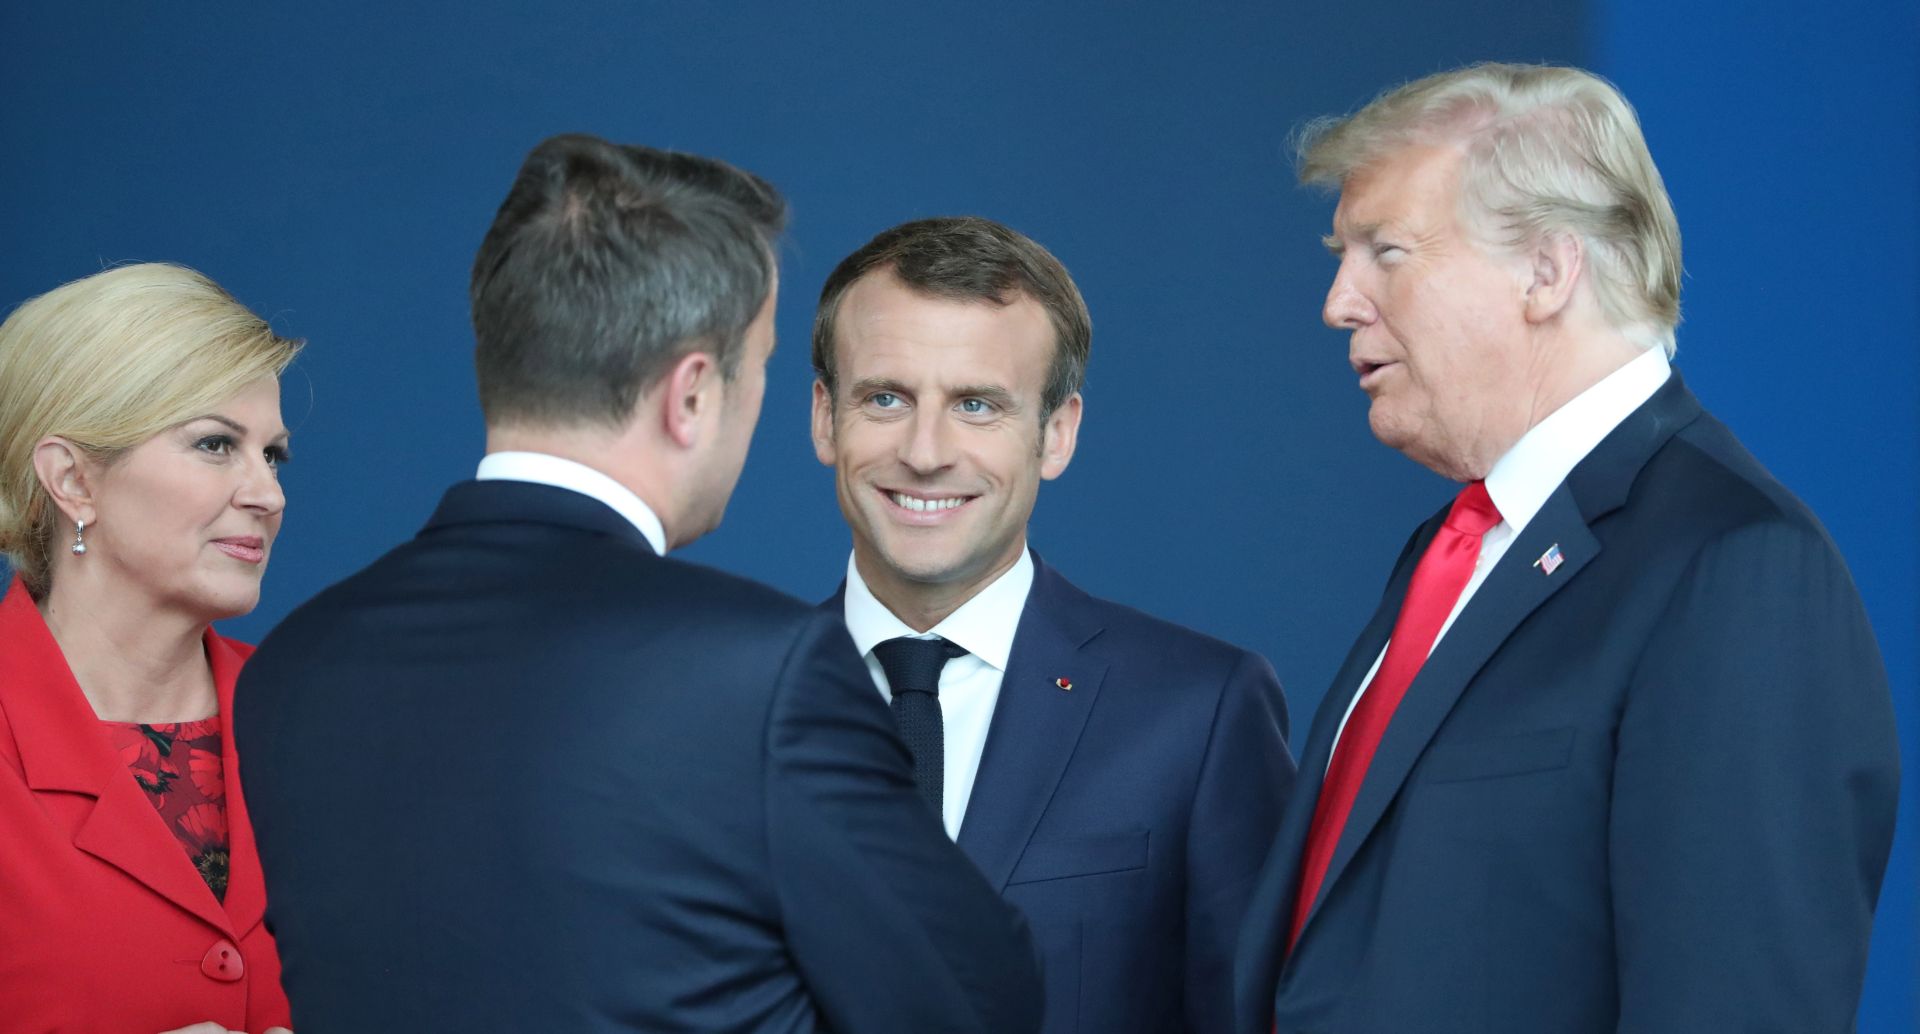 epa06880608 France's President Emmanuel Macron (2R) and US President Donald J. Trump (R) at NATO headquarters in Brussels, Belgium, 11 July 2018. NATO countries' heads of states and governments gather in Brussels for a two-day meeting. In picture at left is seen Croatian President Kolinda Grabar-Kitarovic.  EPA/TATYANA ZENKOVICH / POOL